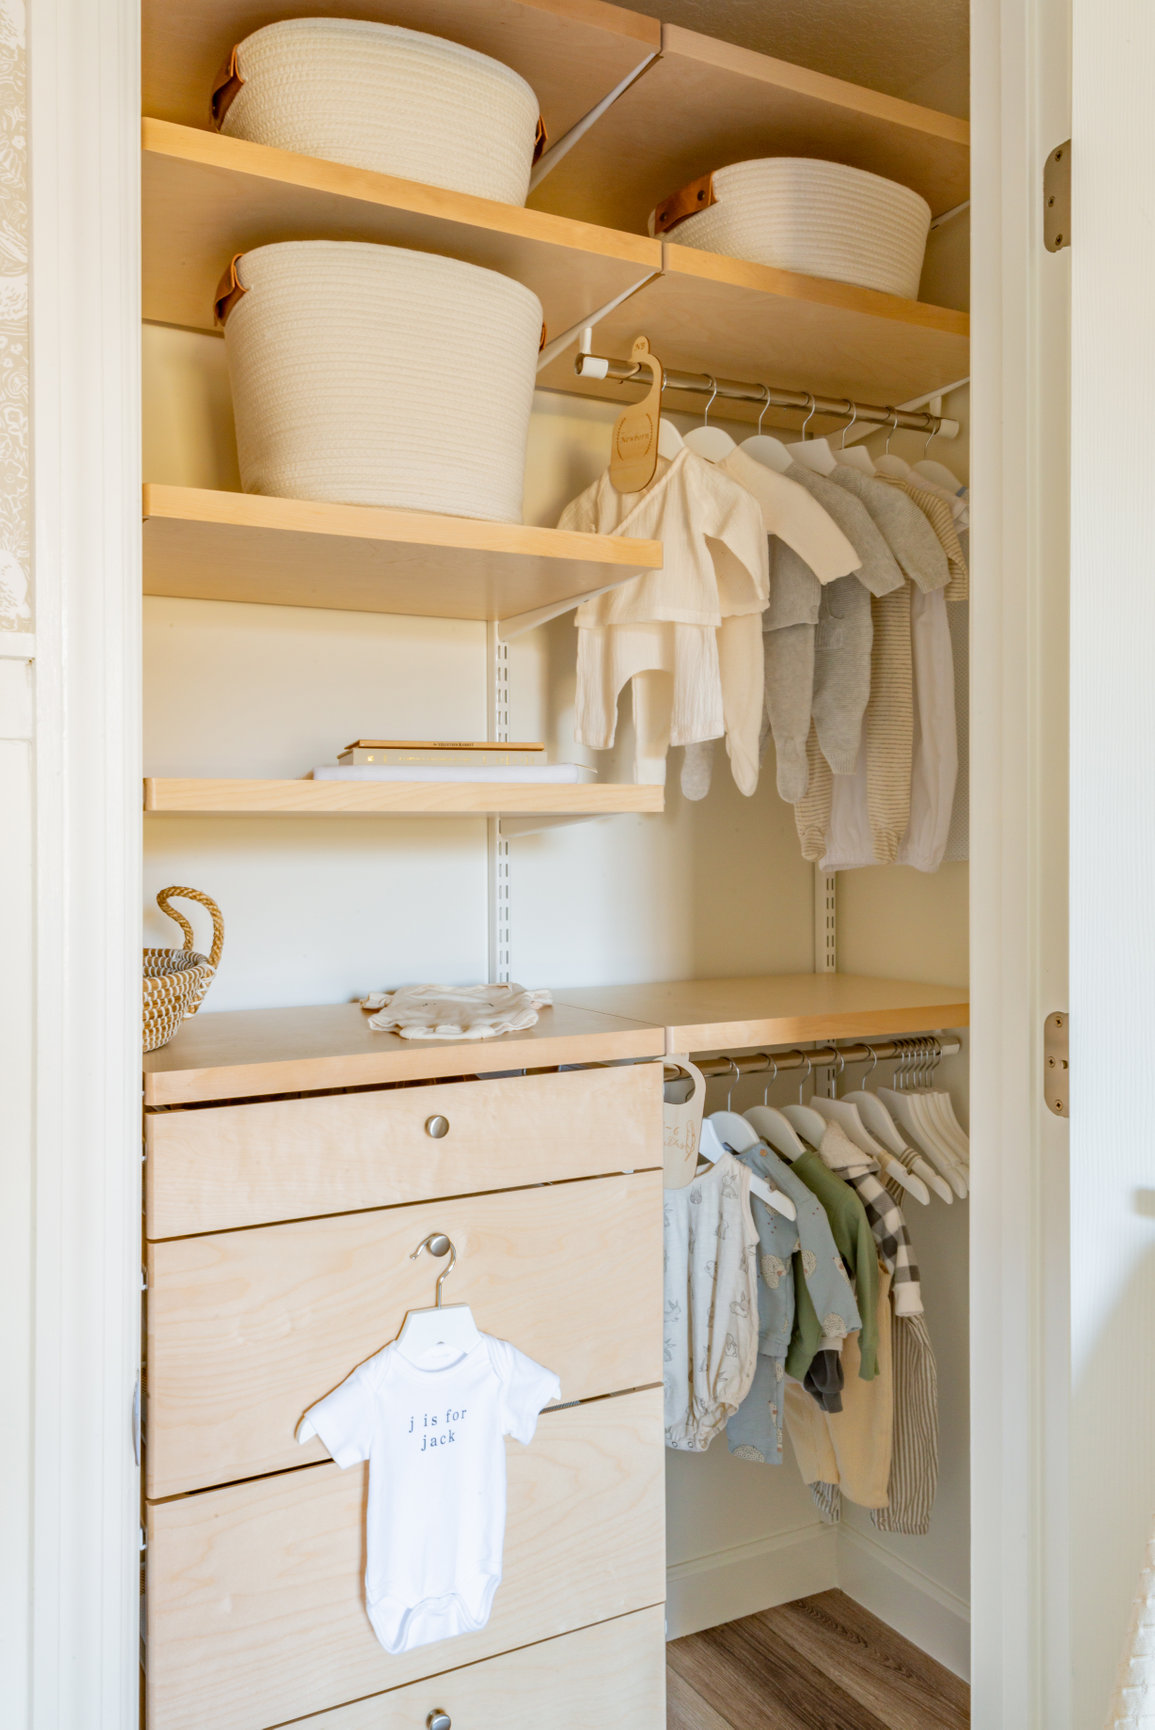 The Container Store closet system in a nursery closet, natural rope baskets